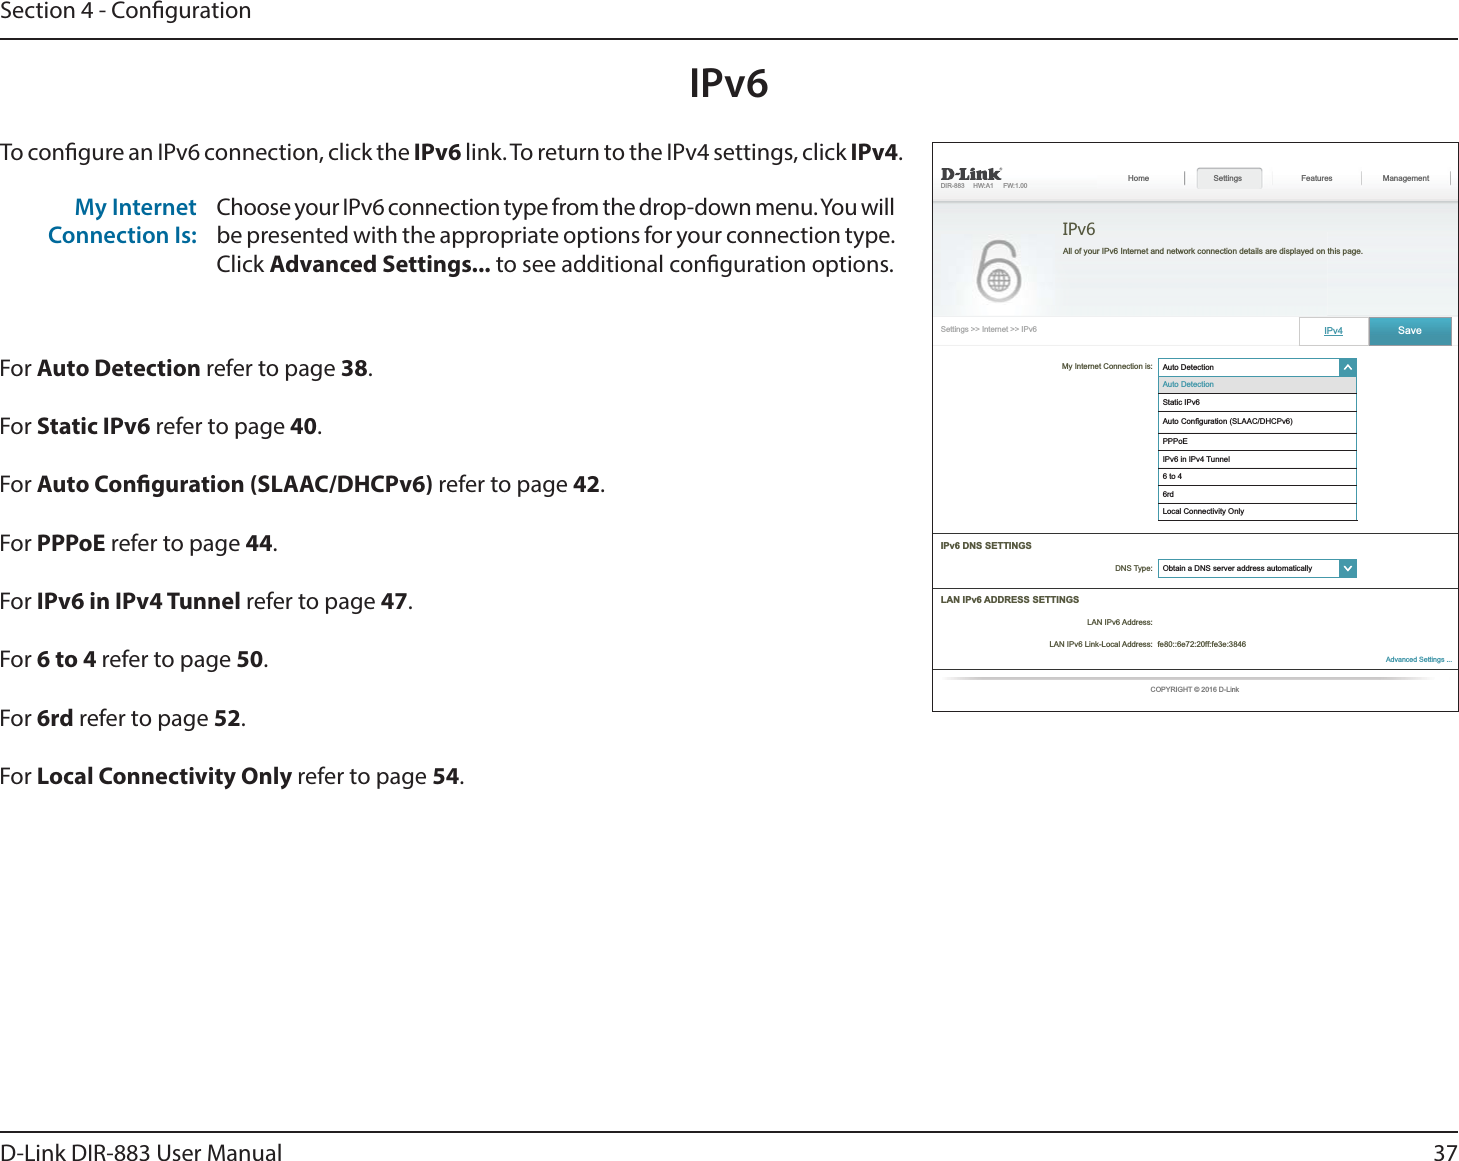 37D-Link DIR-883 User ManualSection 4 - CongurationIPv6To congure an IPv6 connection, click the IPv6 link. To return to the IPv4 settings, click IPv4.For Auto Detection refer to page 38.For Static IPv6 refer to page 40.For Auto Conguration (SLAAC/DHCPv6) refer to page 42.For PPPoE refer to page 44.For IPv6 in IPv4 Tunnel refer to page 47.For 6 to 4 refer to page 50.For 6rd refer to page 52.For Local Connectivity Only refer to page 54.My Internet Connection Is:Choose your IPv6 connection type from the drop-down menu. You will be presented with the appropriate options for your connection type. Click Advanced Settings... to see additional conguration options.My Internet Connection is: ໹PPPoE   Features Management IPv6 ໹ 